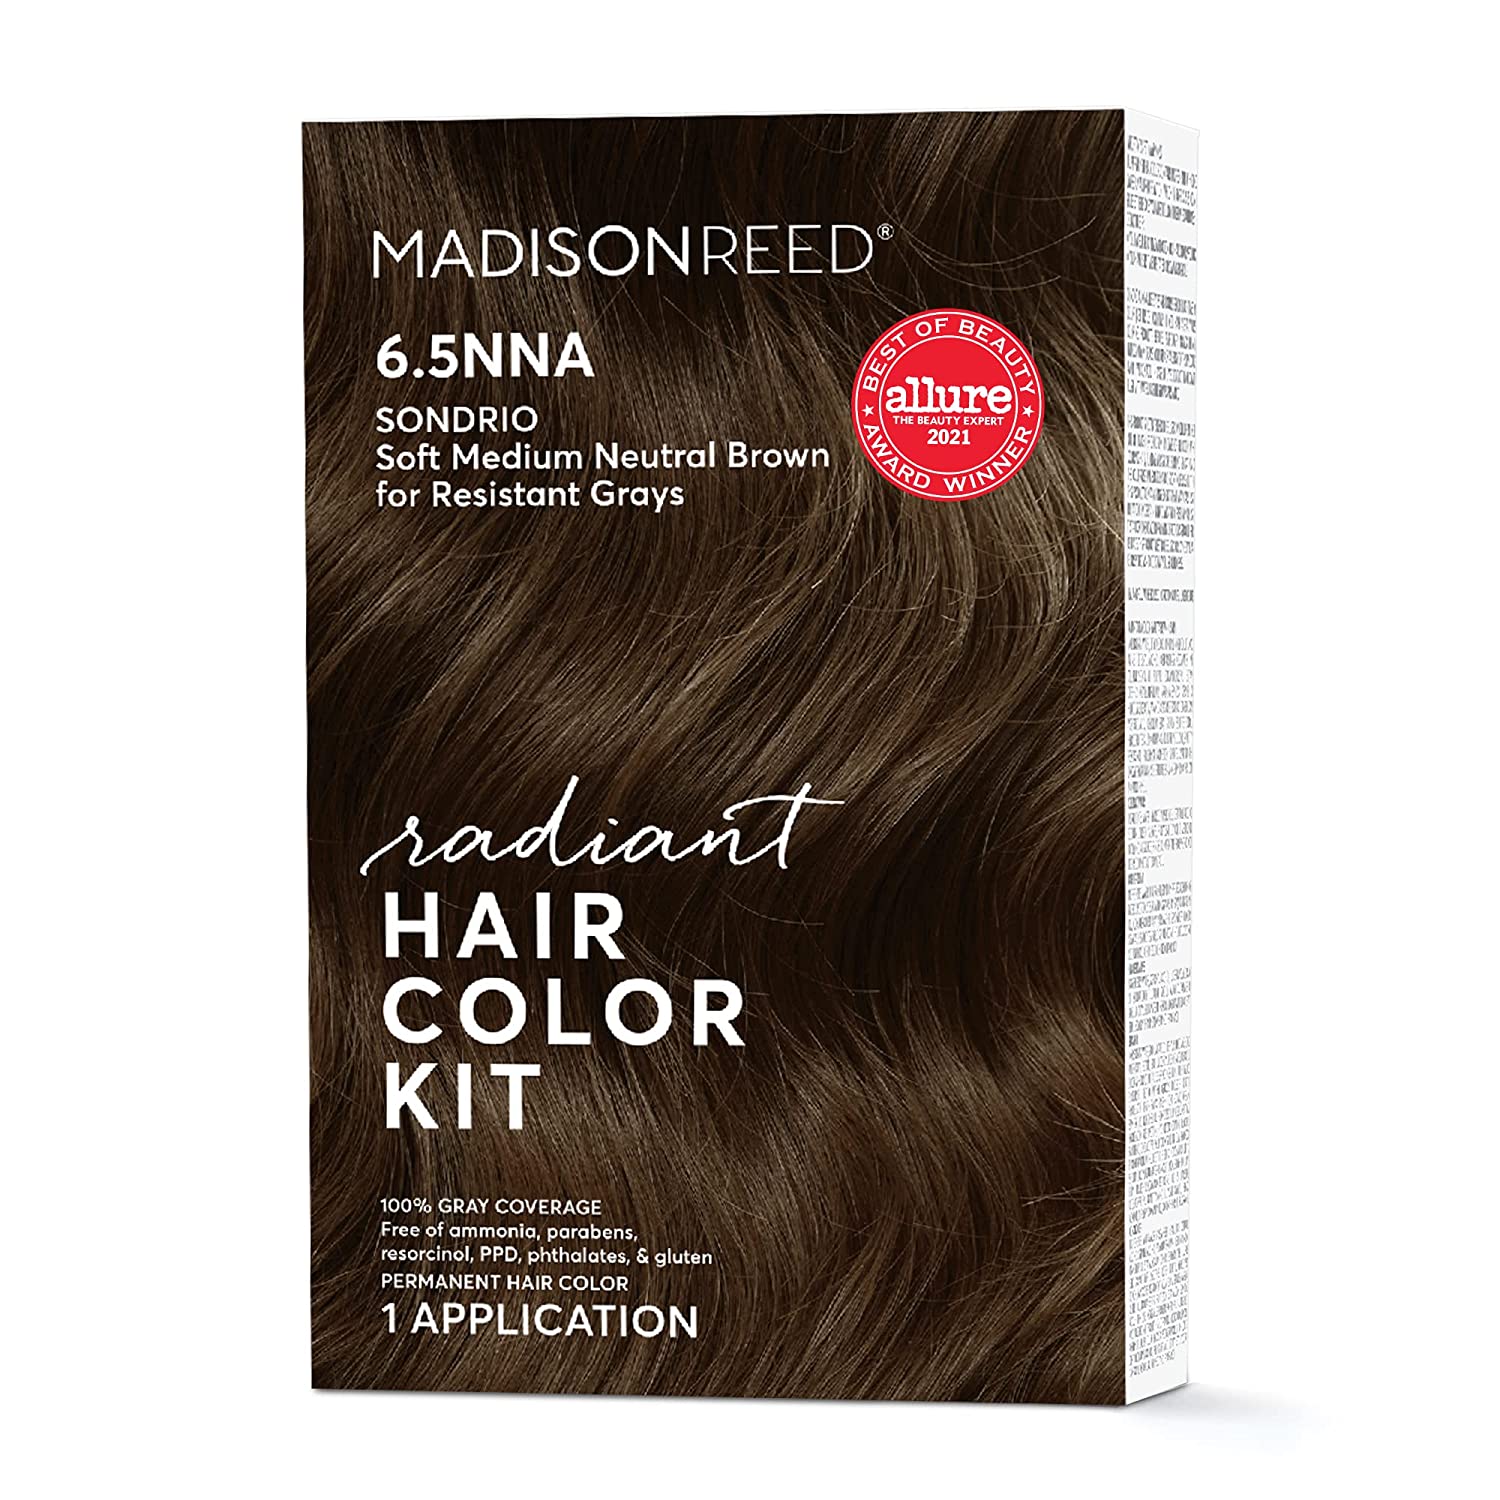  9. Madison Reed Radiant Hair Color Kit is the best kit. 